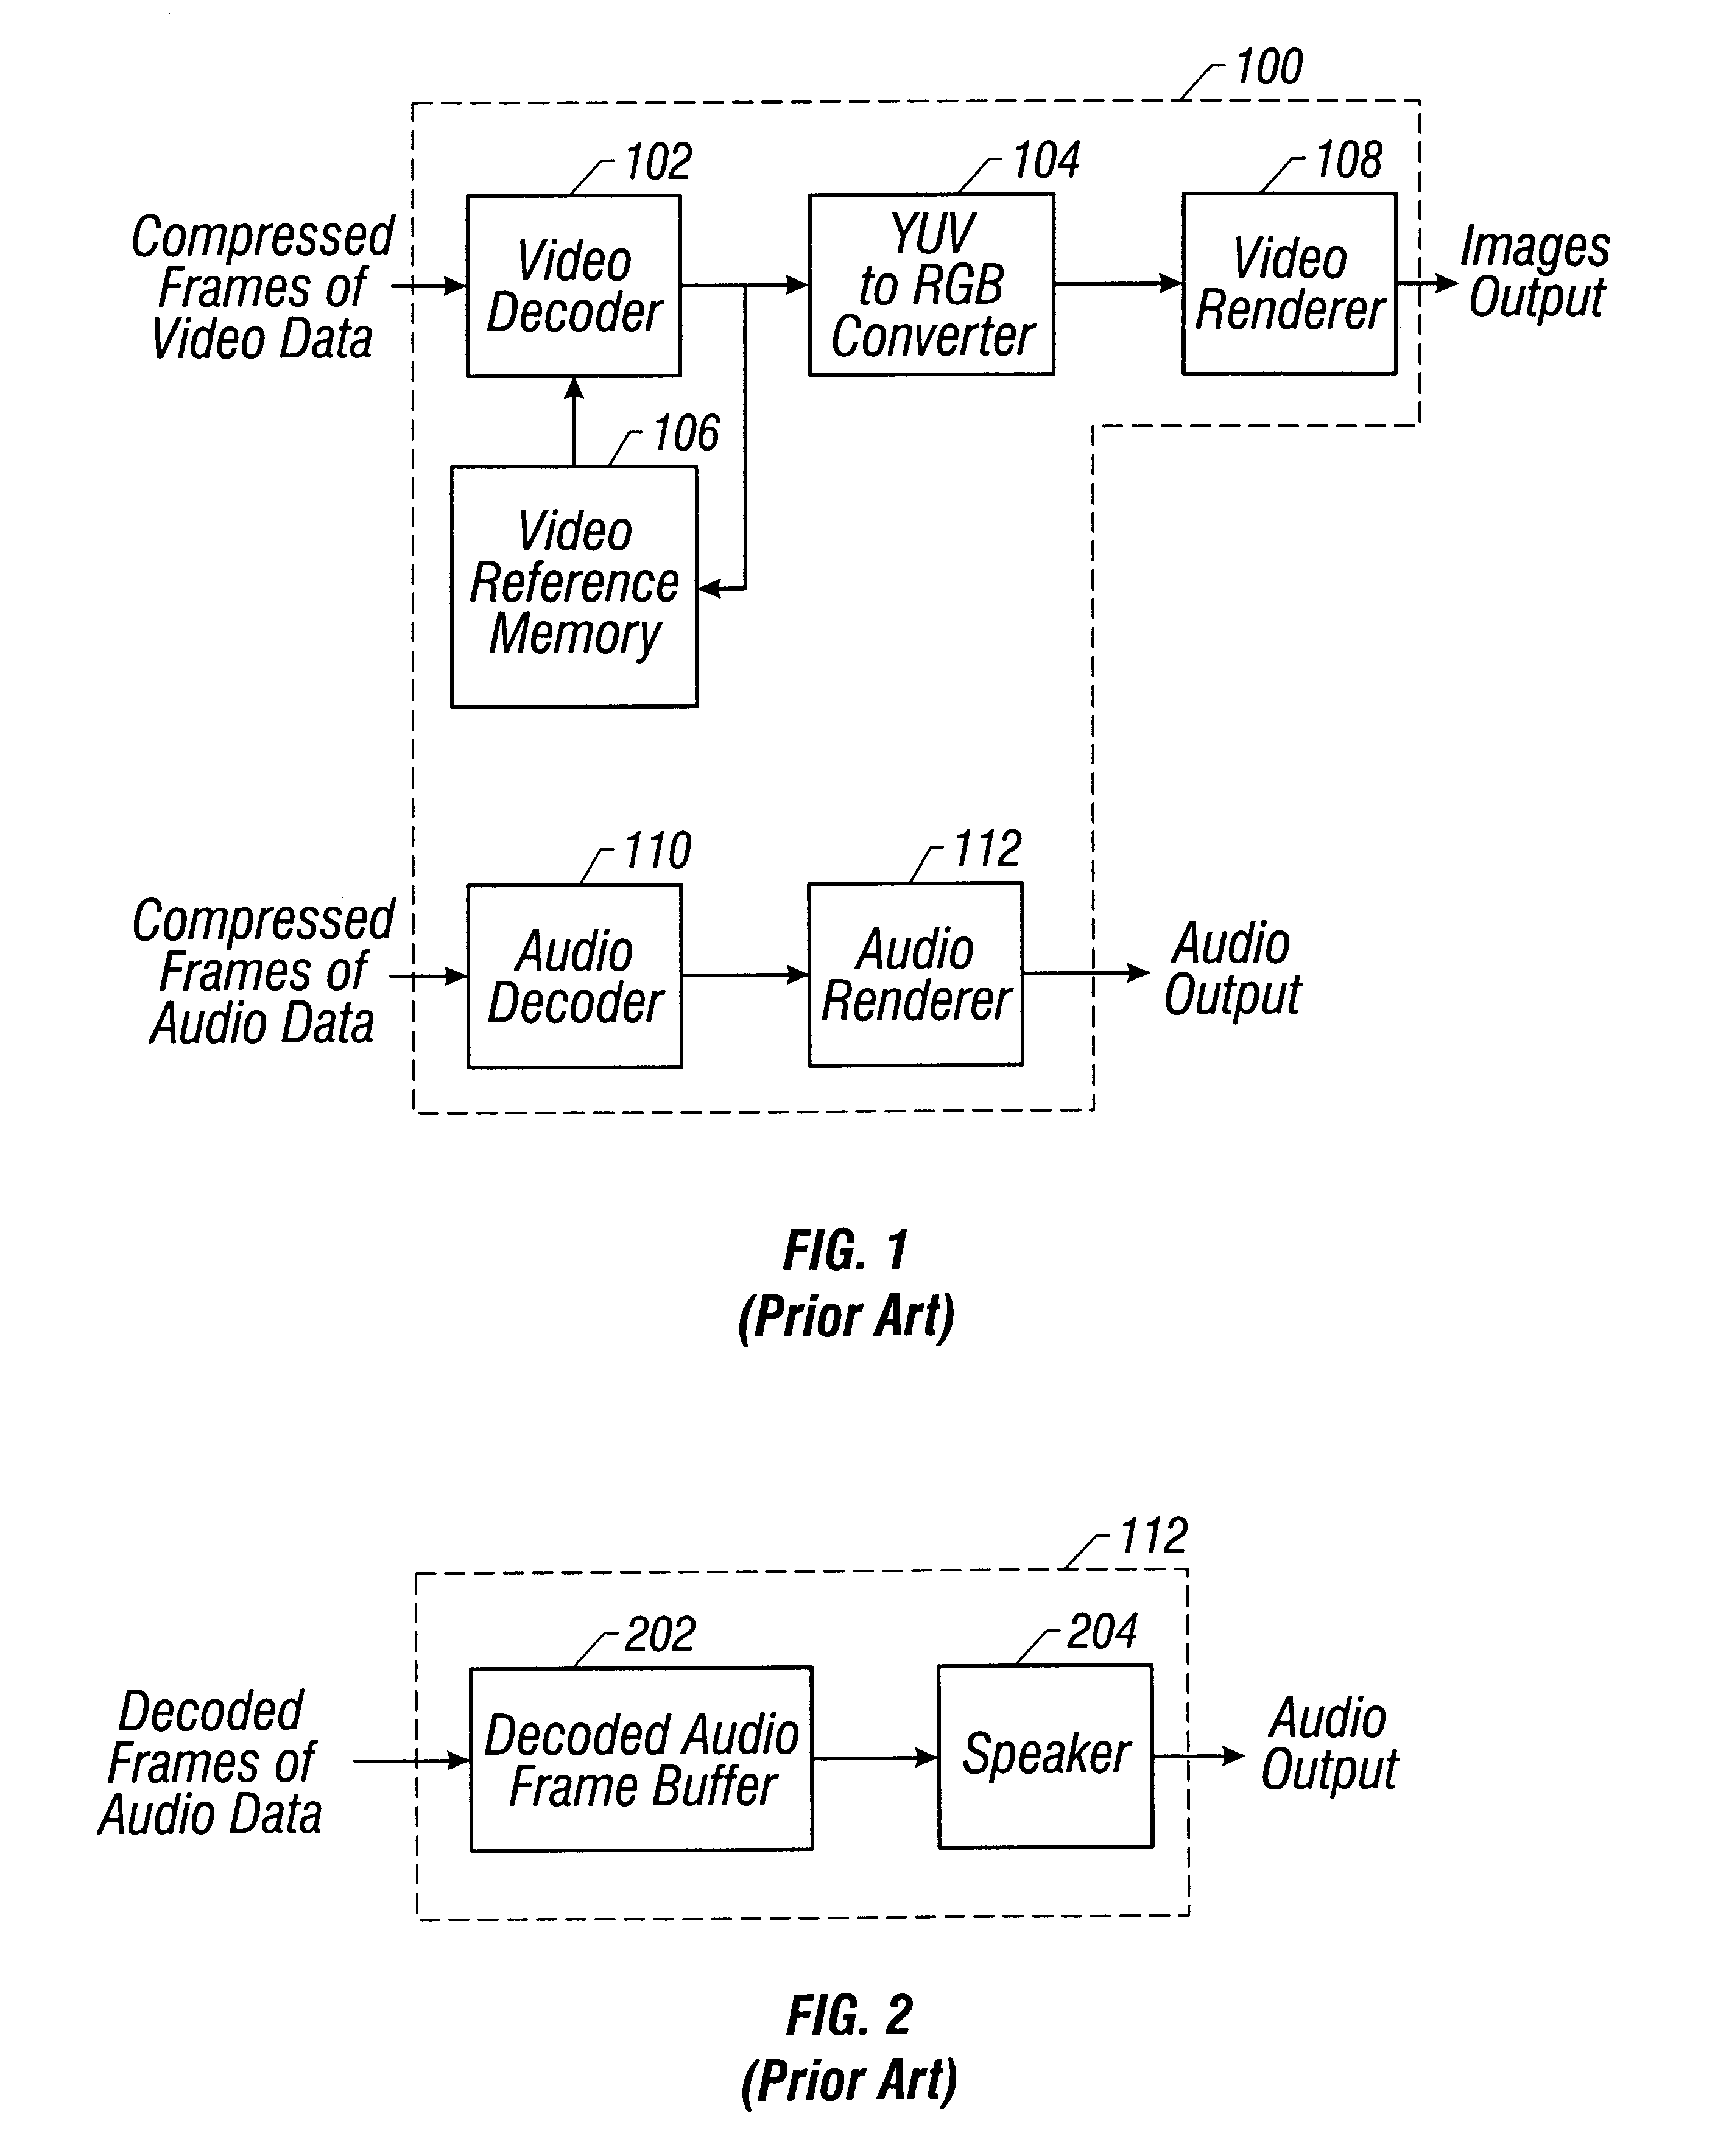 Method and apparatus for detecting processor congestion during audio and video decode